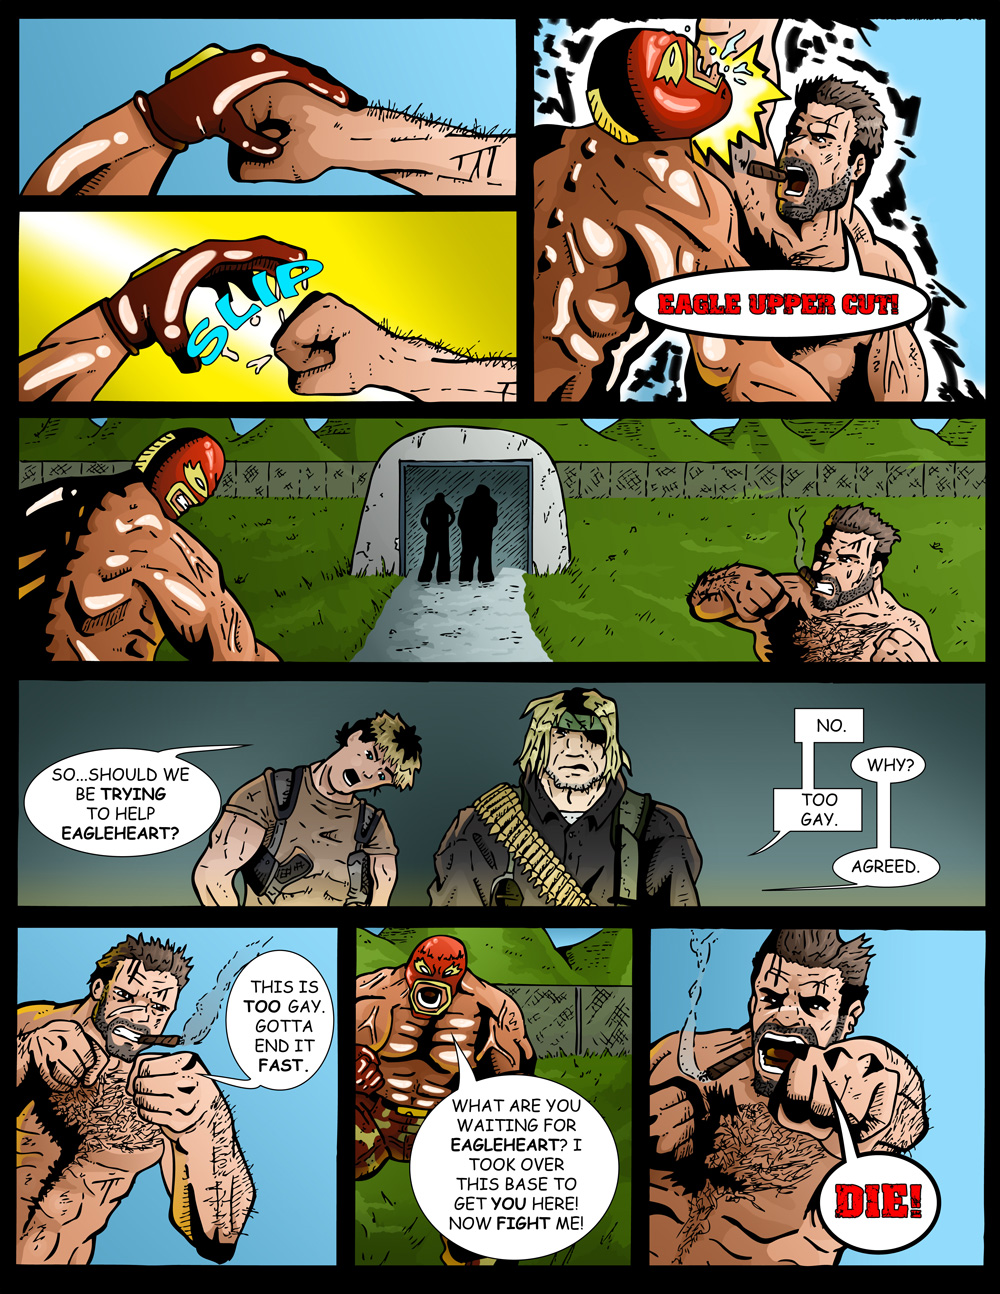 MISSION 001: PAGE 10 “TOO GAY”